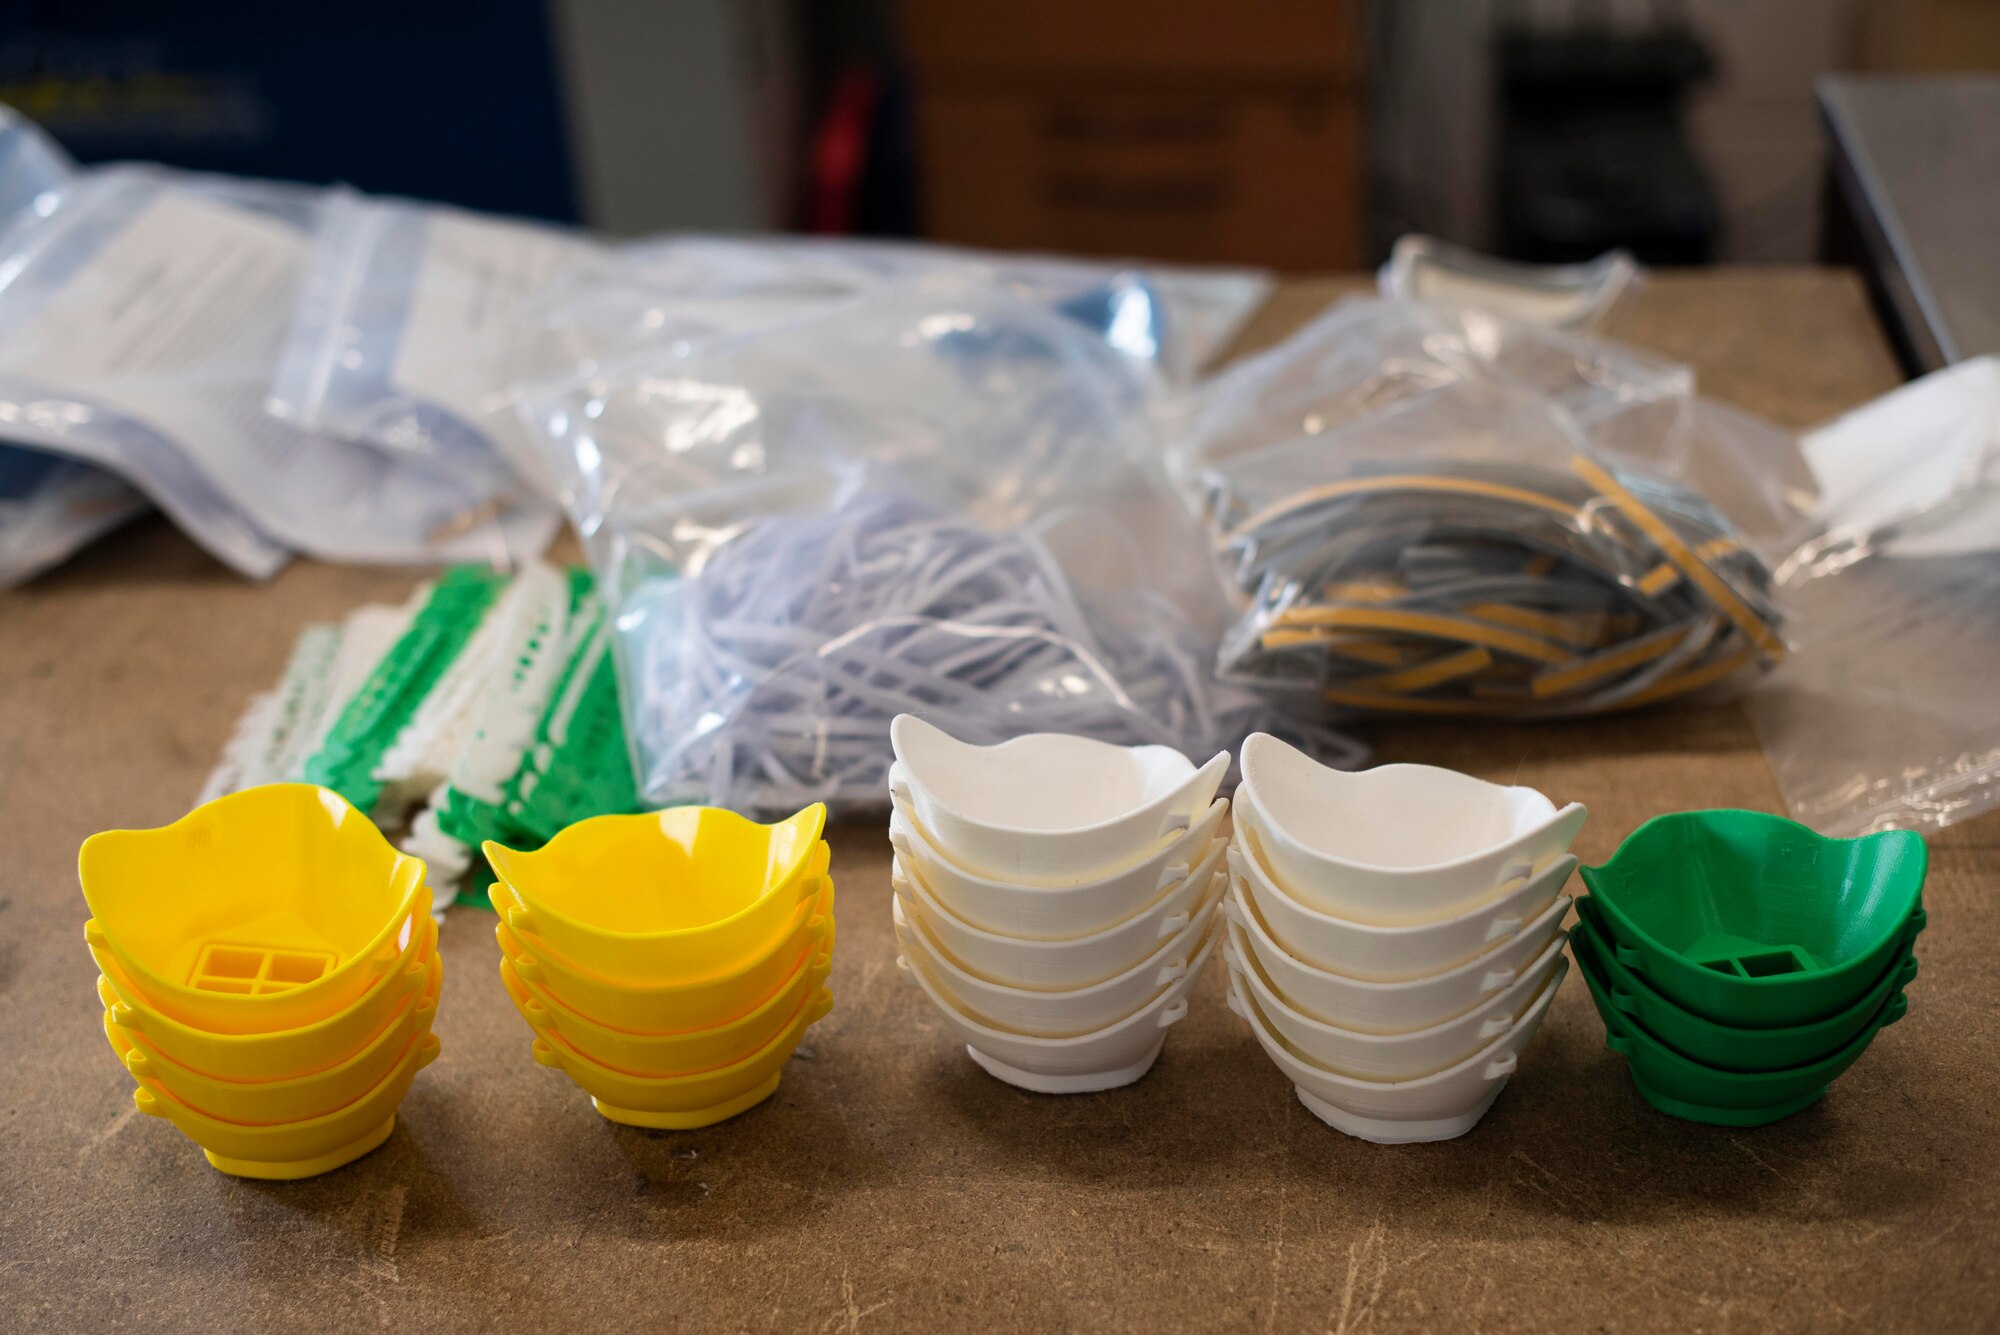 Newly printed face masks and related materials necessary for their use sit on a table inside the 352d Special Operations Aircraft Maintenance Squadron, 352d Special Operations Wing, April 27, 2020, at RAF Mildenhall, England. The masks can be worn to fight the spread of COVID-19 and are made out of 3D printing plastics that can be disinfected with a bleach solution or sanitizing wipes. The 352d Special Operations Wing is the sole Air Force special operations unit in the European Theater.  (U.S. Air Force photo by Airman 1st Class Joseph Barron)